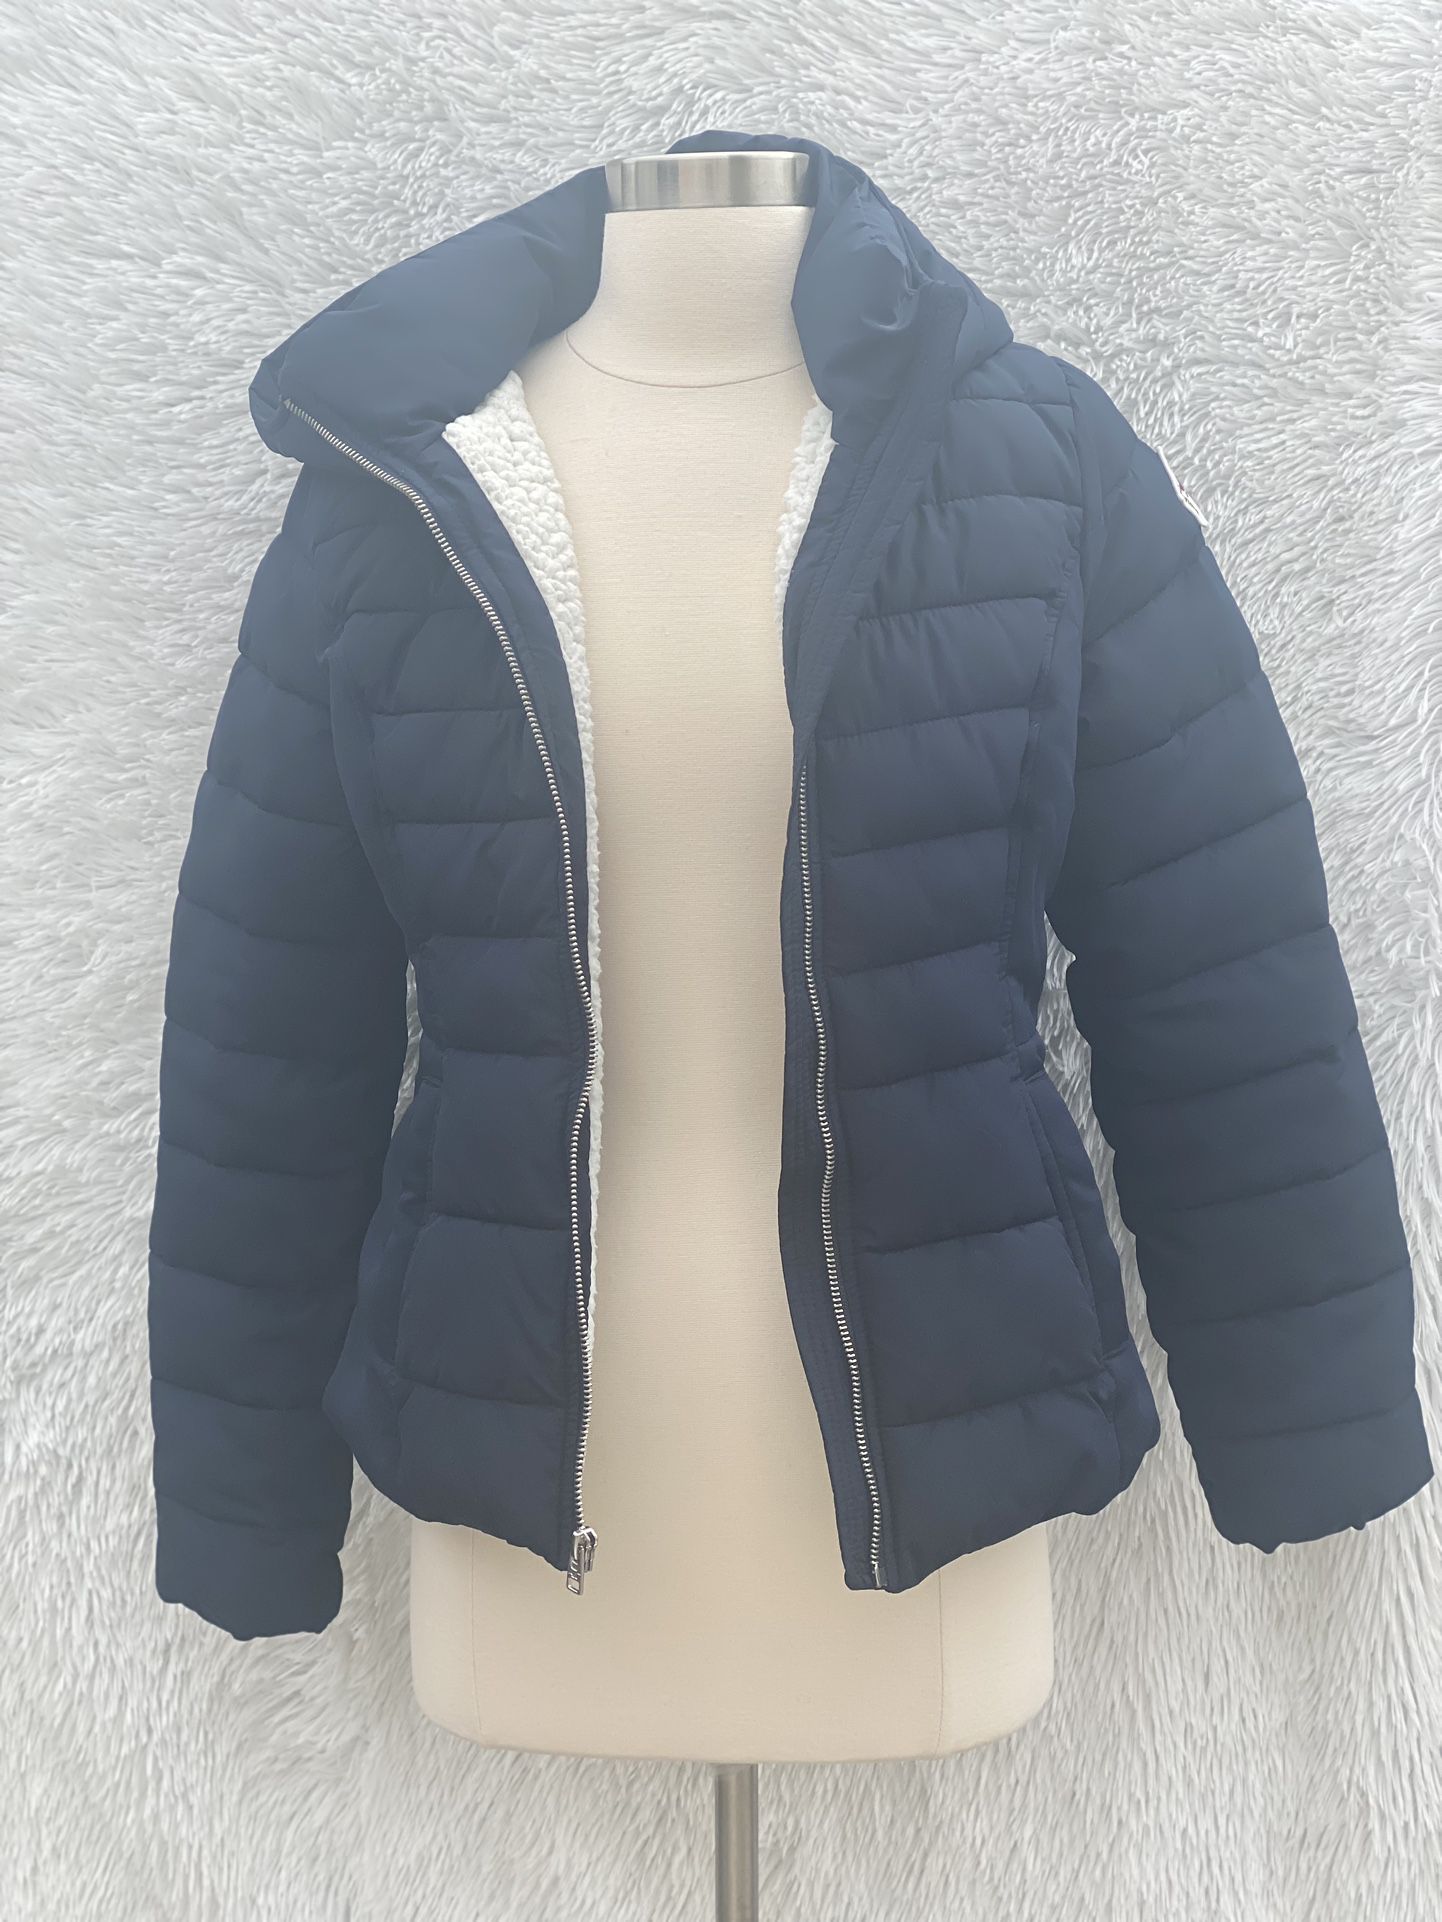 Hollister Puffer Jacket in size Small